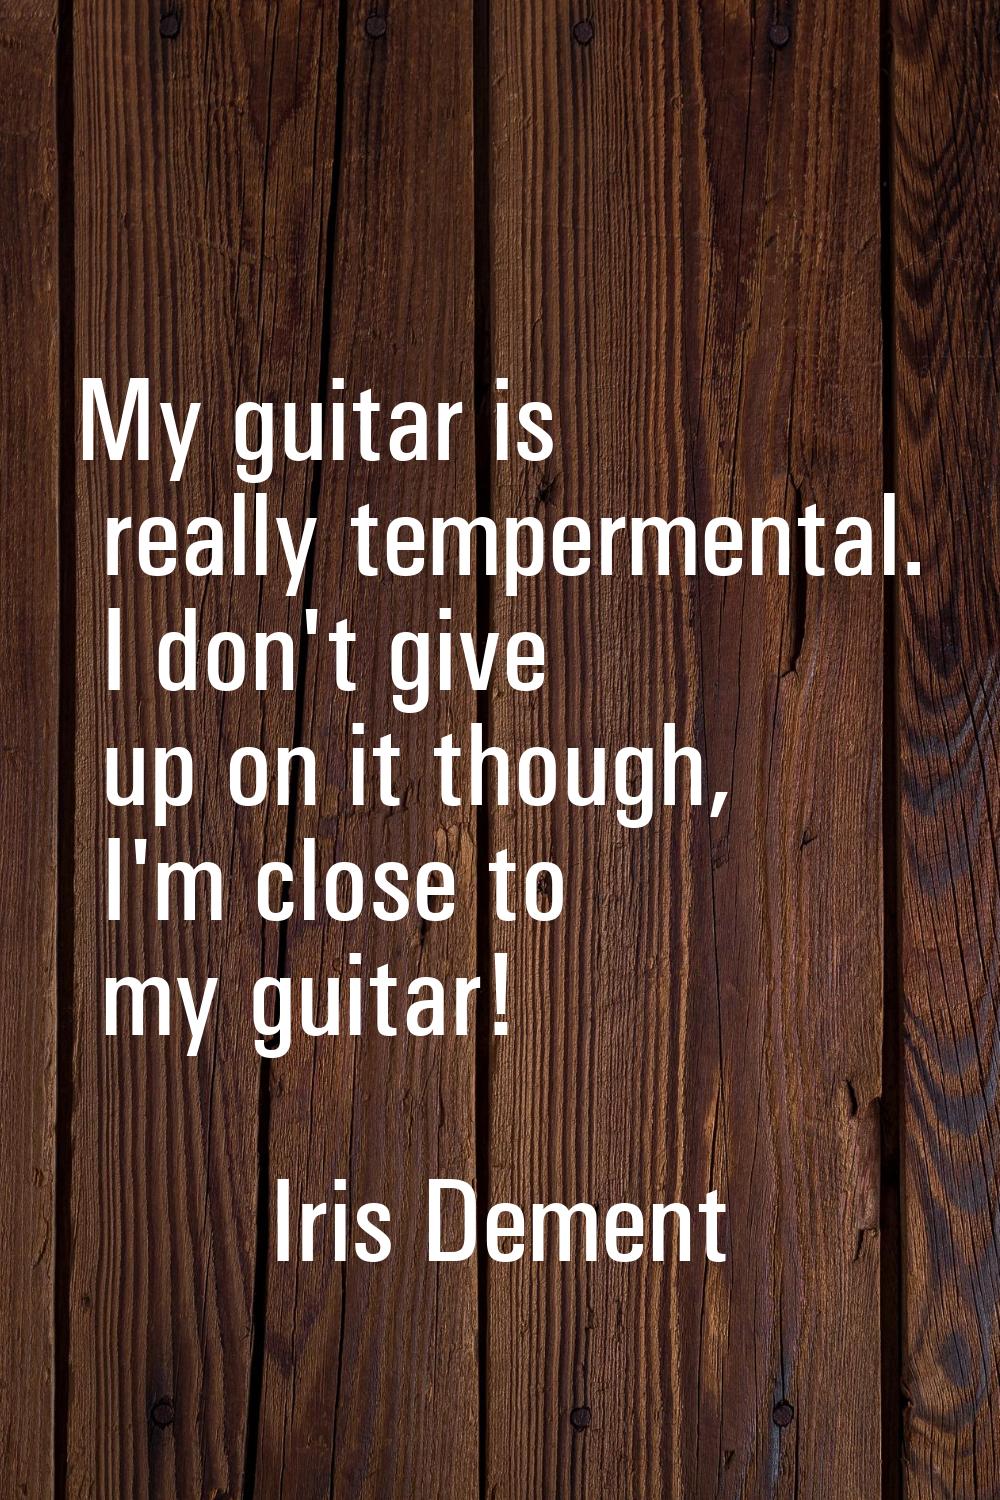 My guitar is really tempermental. I don't give up on it though, I'm close to my guitar!